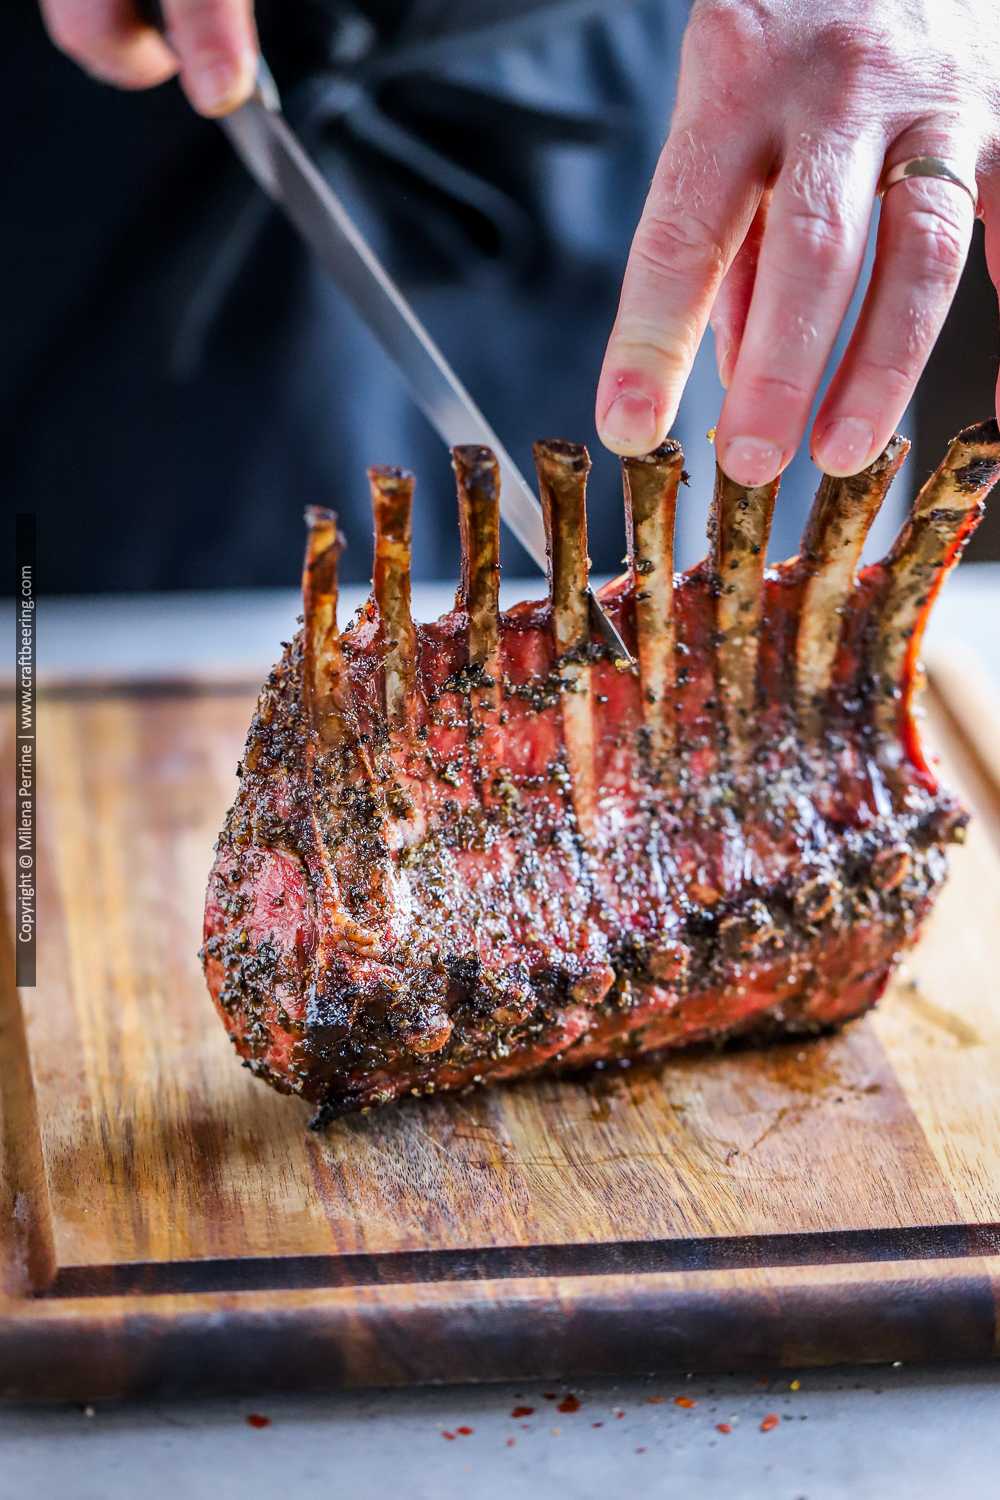 Rack of lamb smoked to perfection is being carved into lamb rib chops